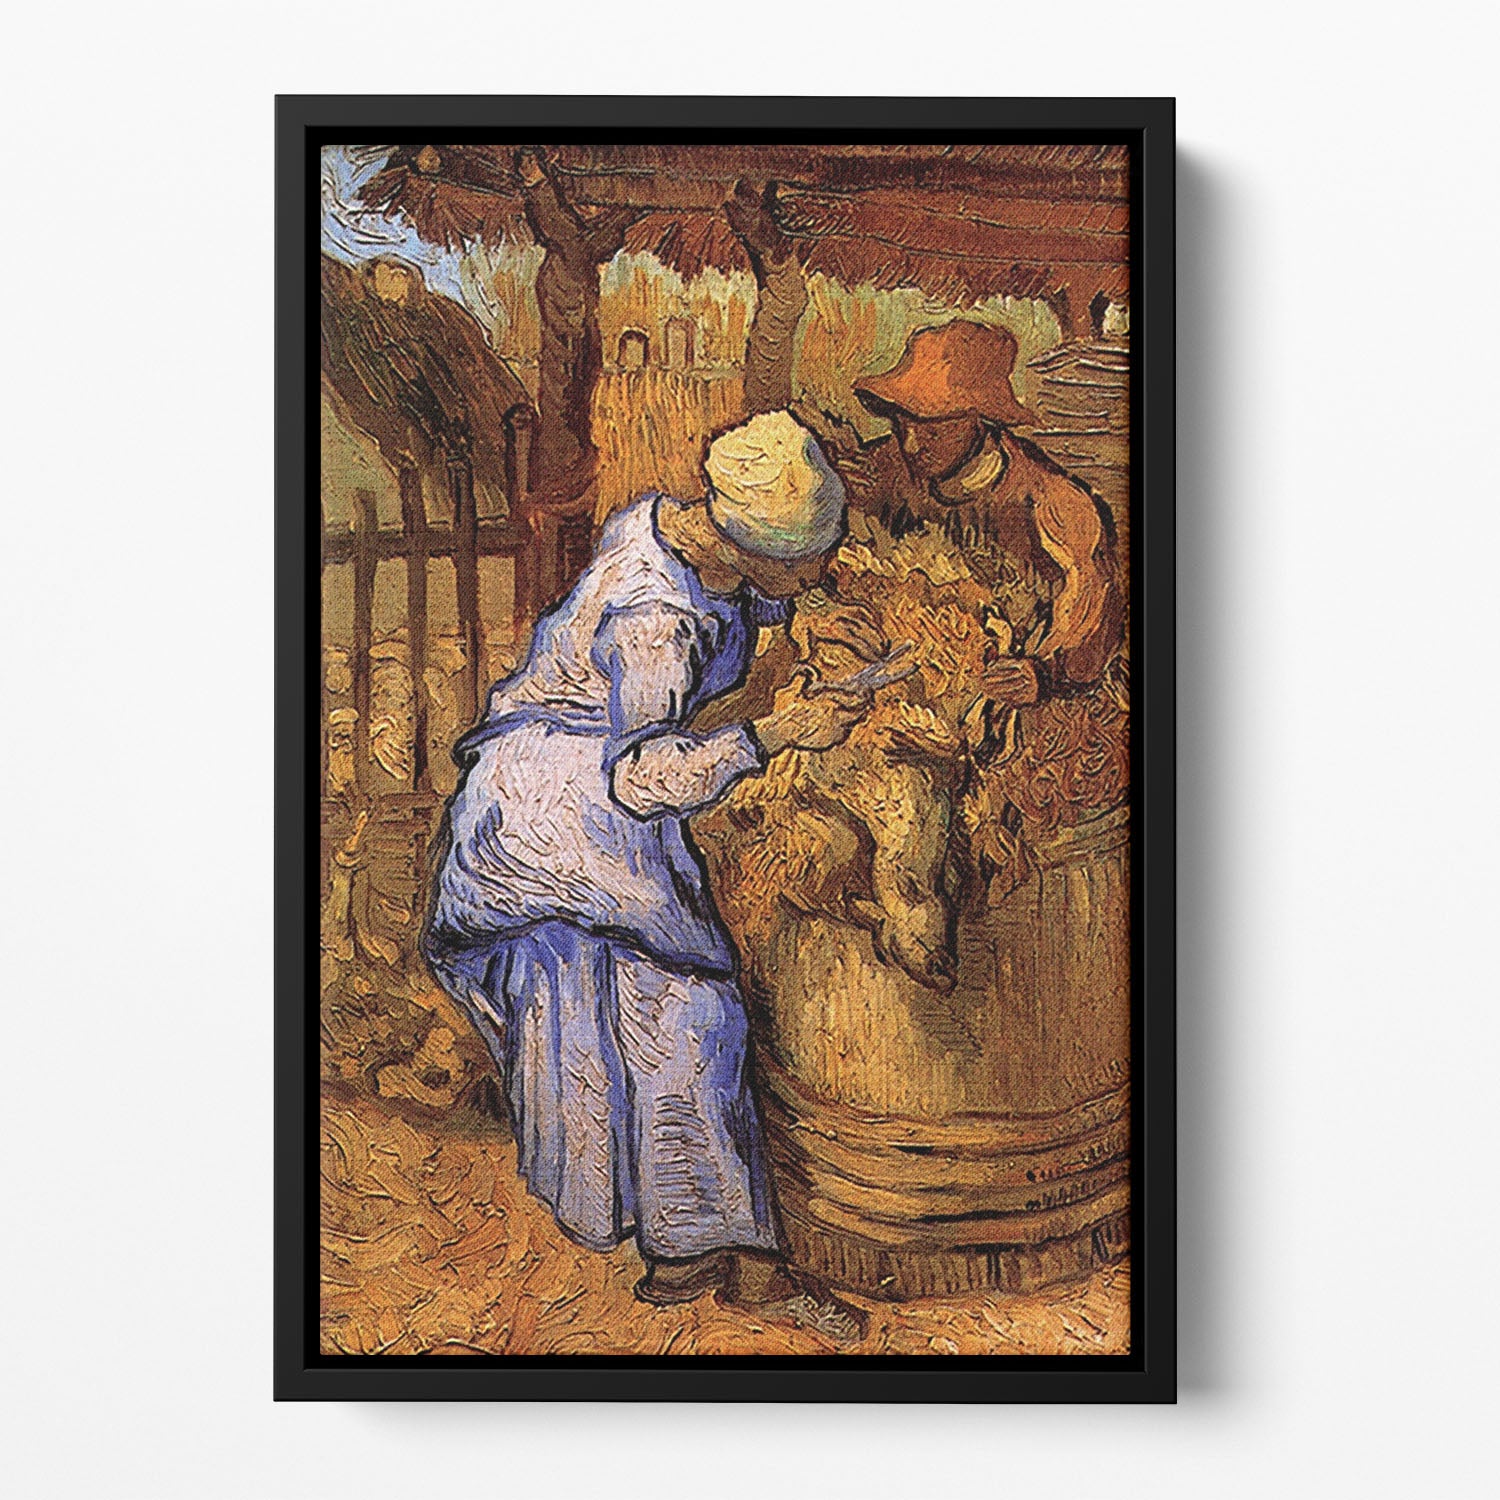 Sheep Shearers by Van Gogh Floating Framed Canvas